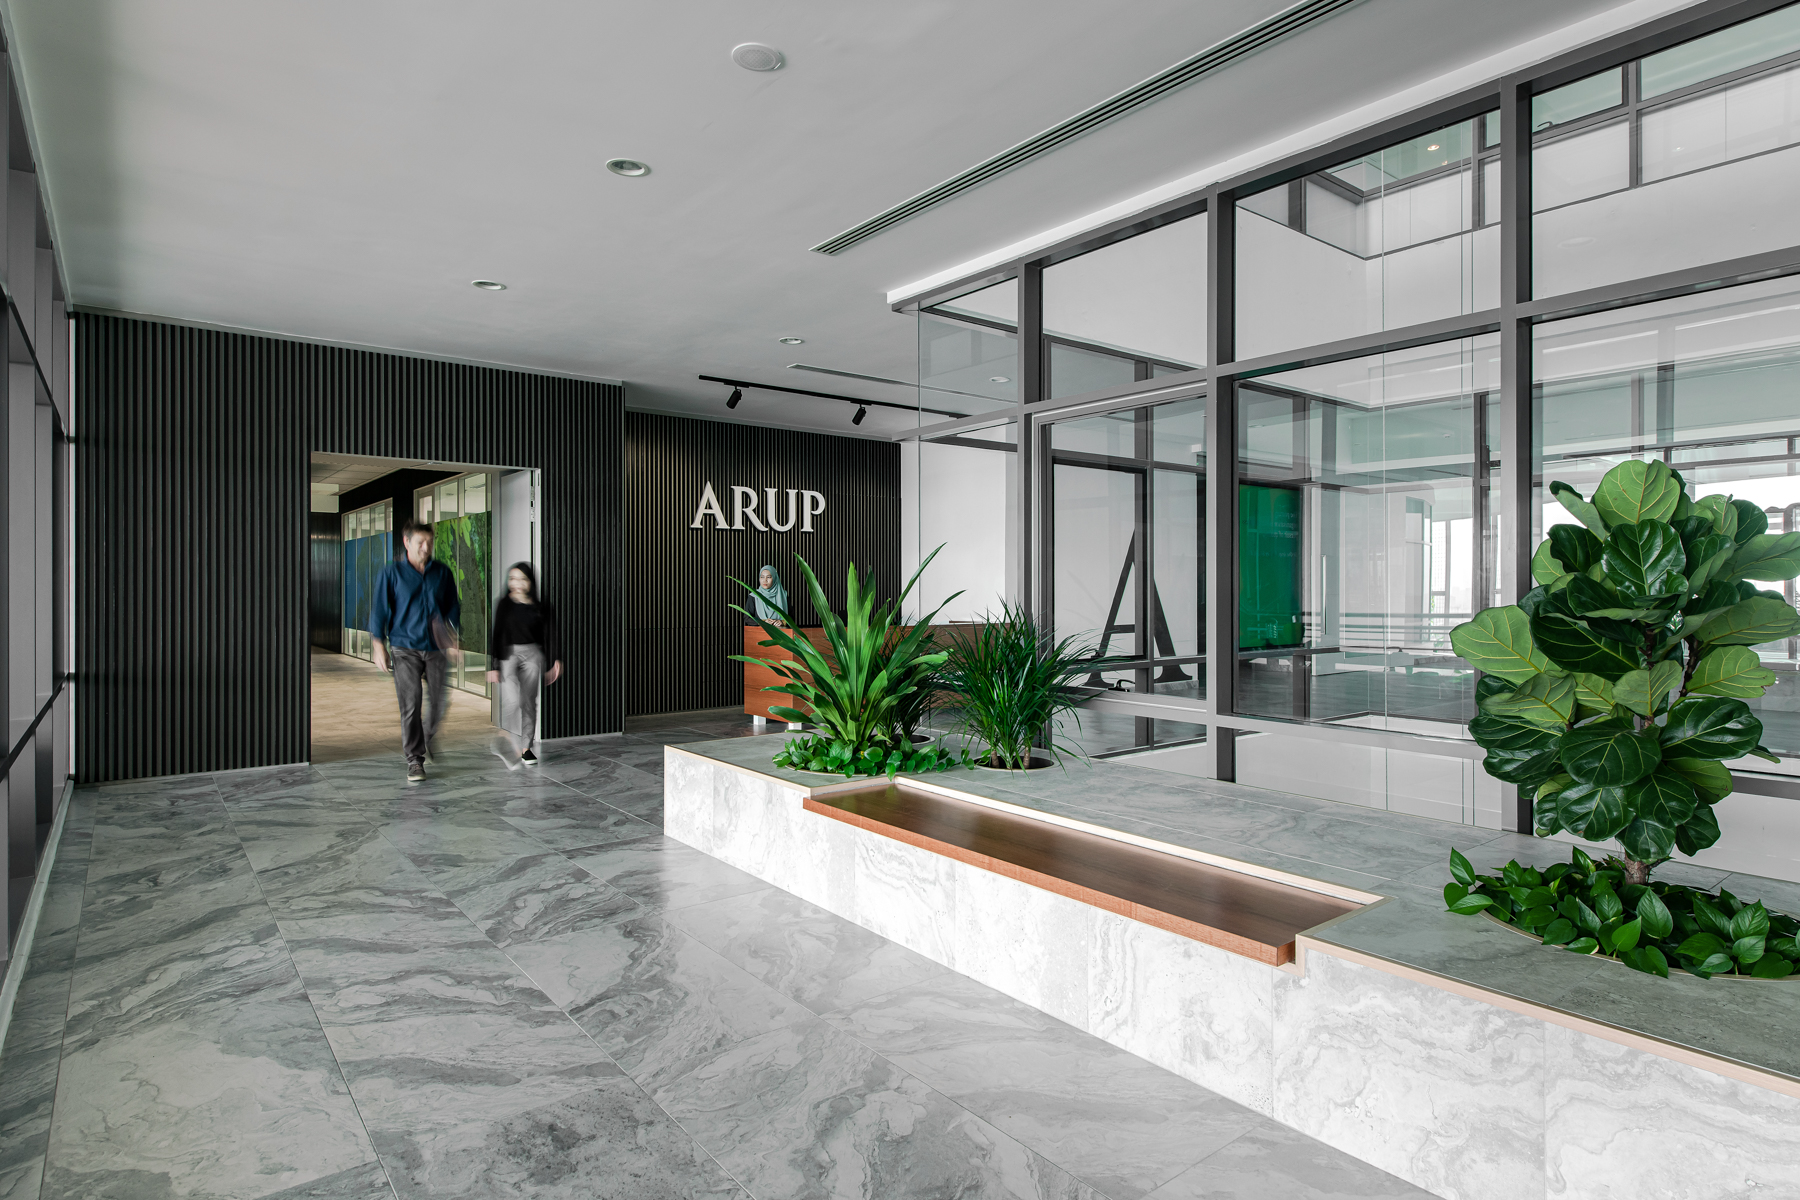 ARUP KUALA LUMPUR OFFICE WINS FIRST GREENRE PLATINUM RATING FOR OFFICE INTERIOR IN MALAYSIA